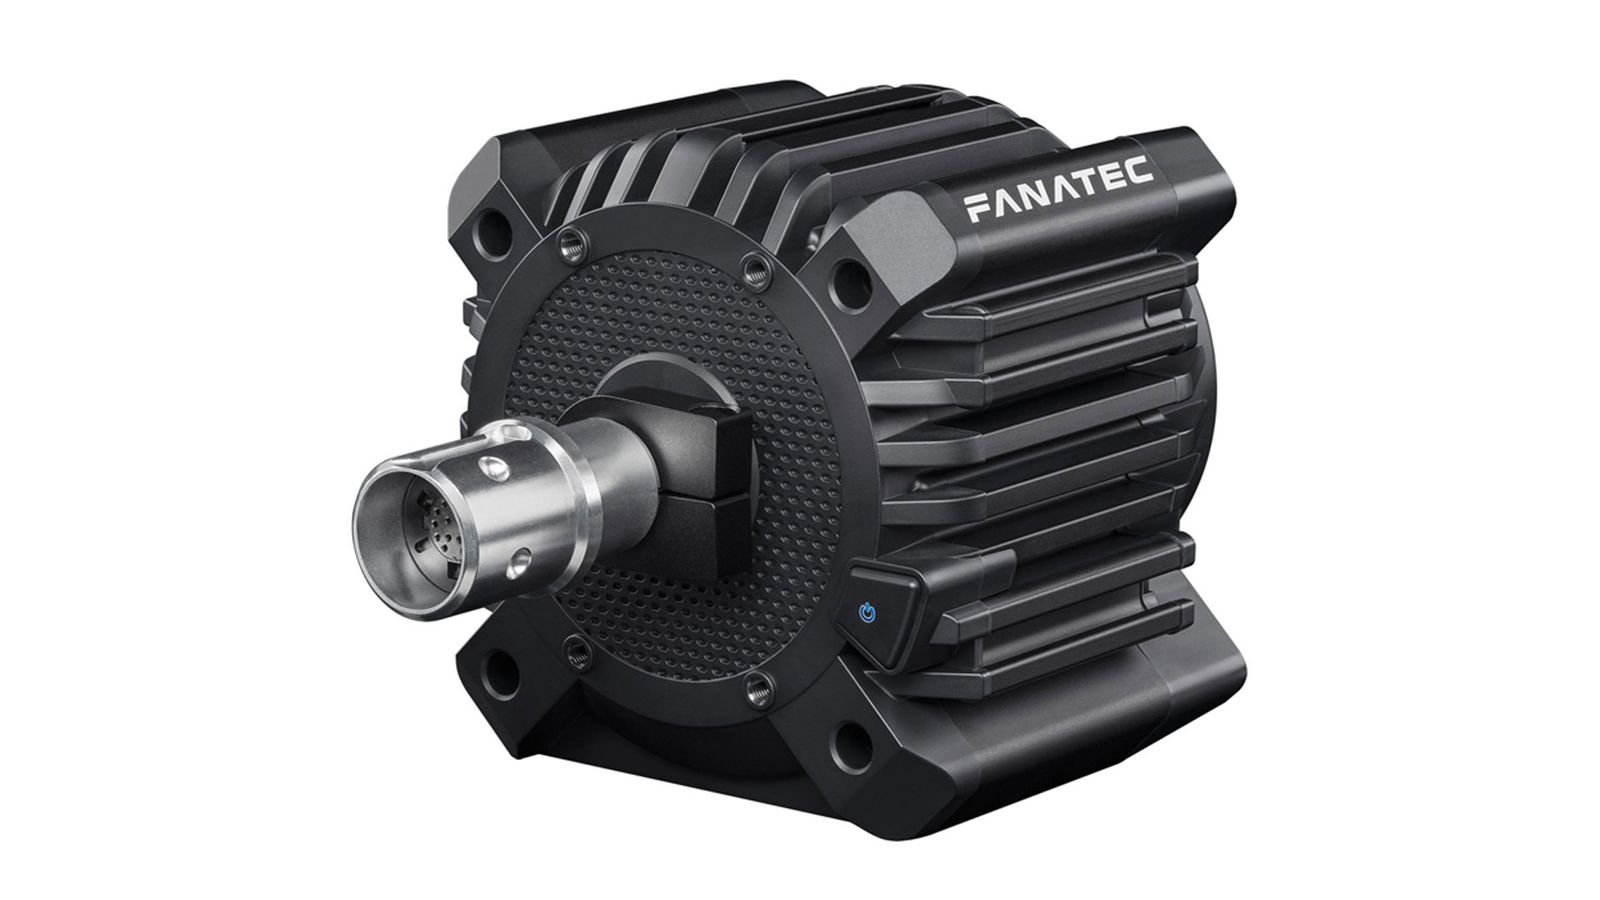 Fanatec GT DD Pro product image of a black wheel base with a silver connector mount.